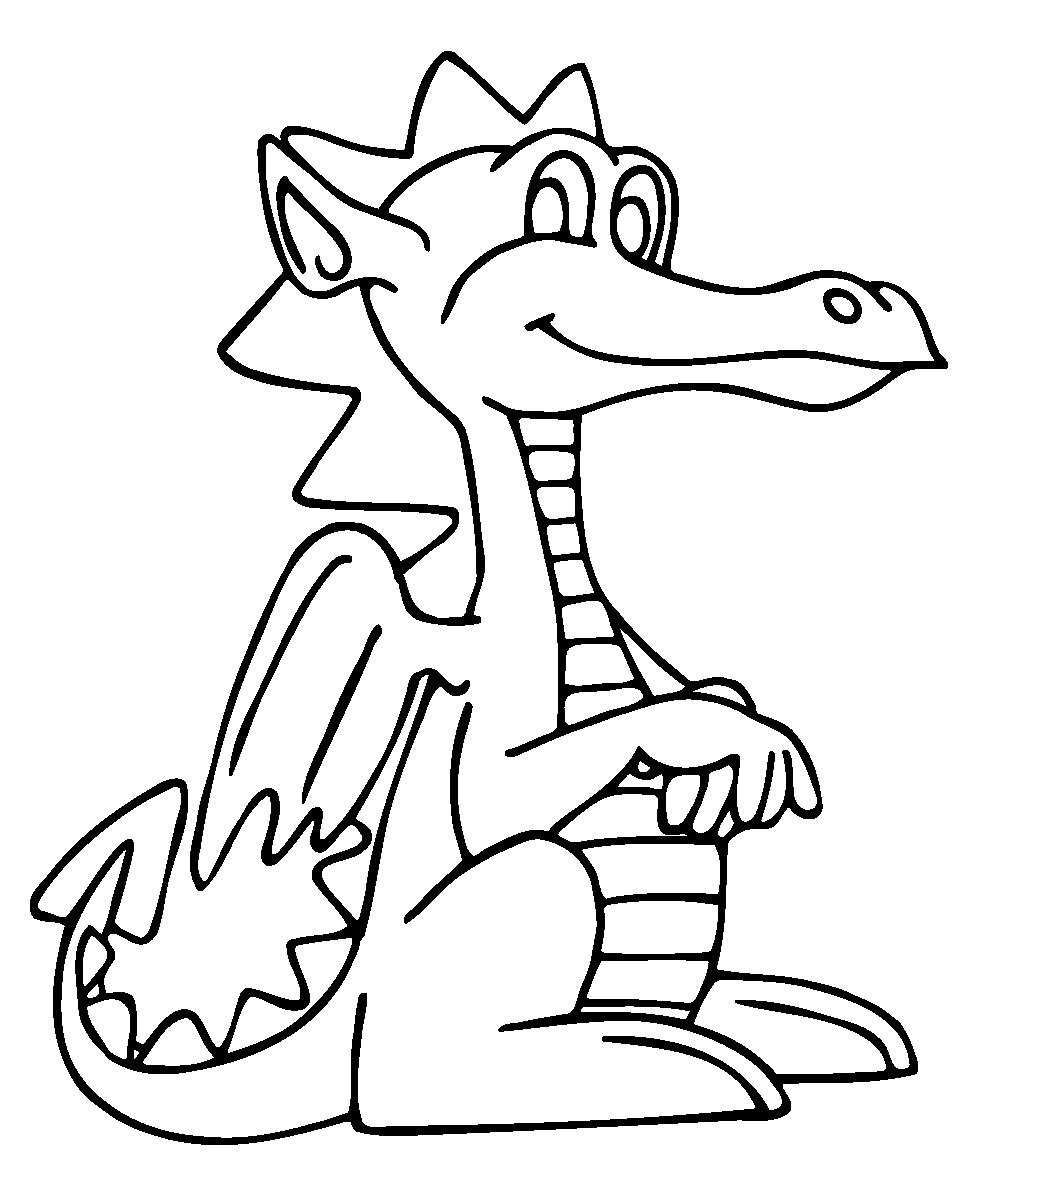 dragons clipart black and white fairy tale character